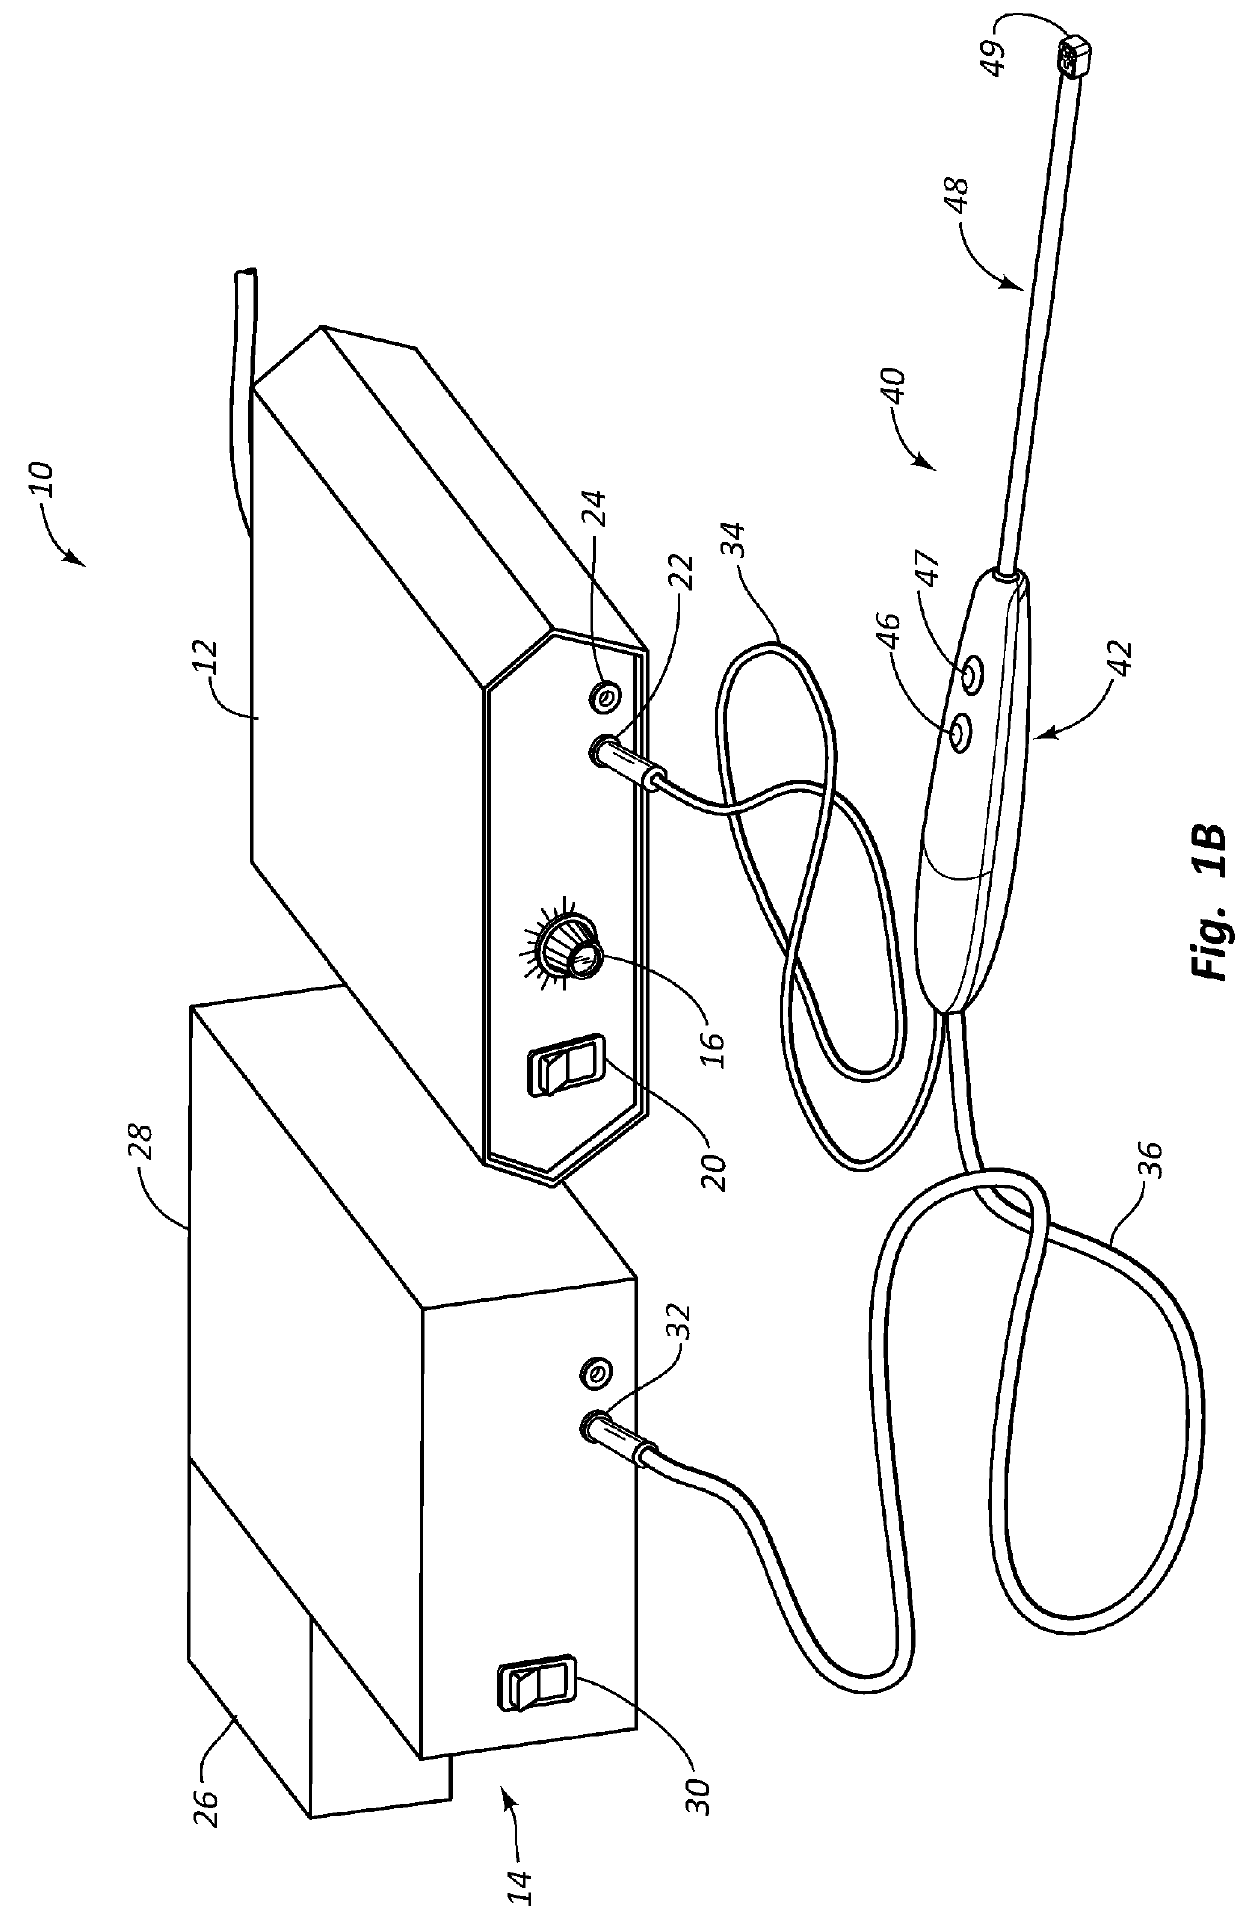 Electrosurgical instrument with selective control of electrode activity